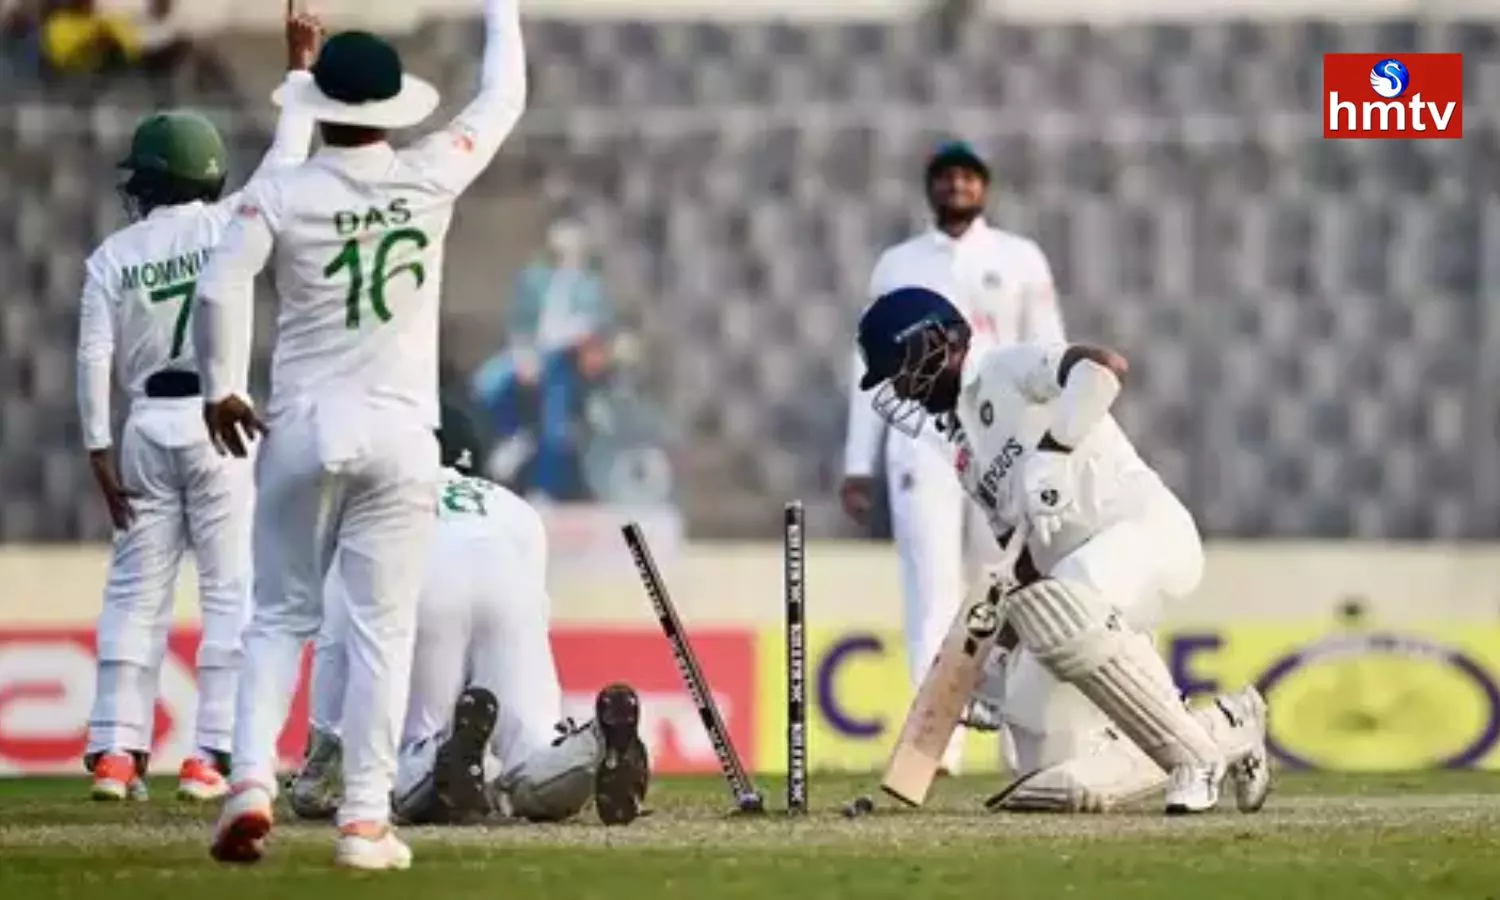 India Faltered In The Second Test 4 Wickets For 34 Runs In The Second Innings